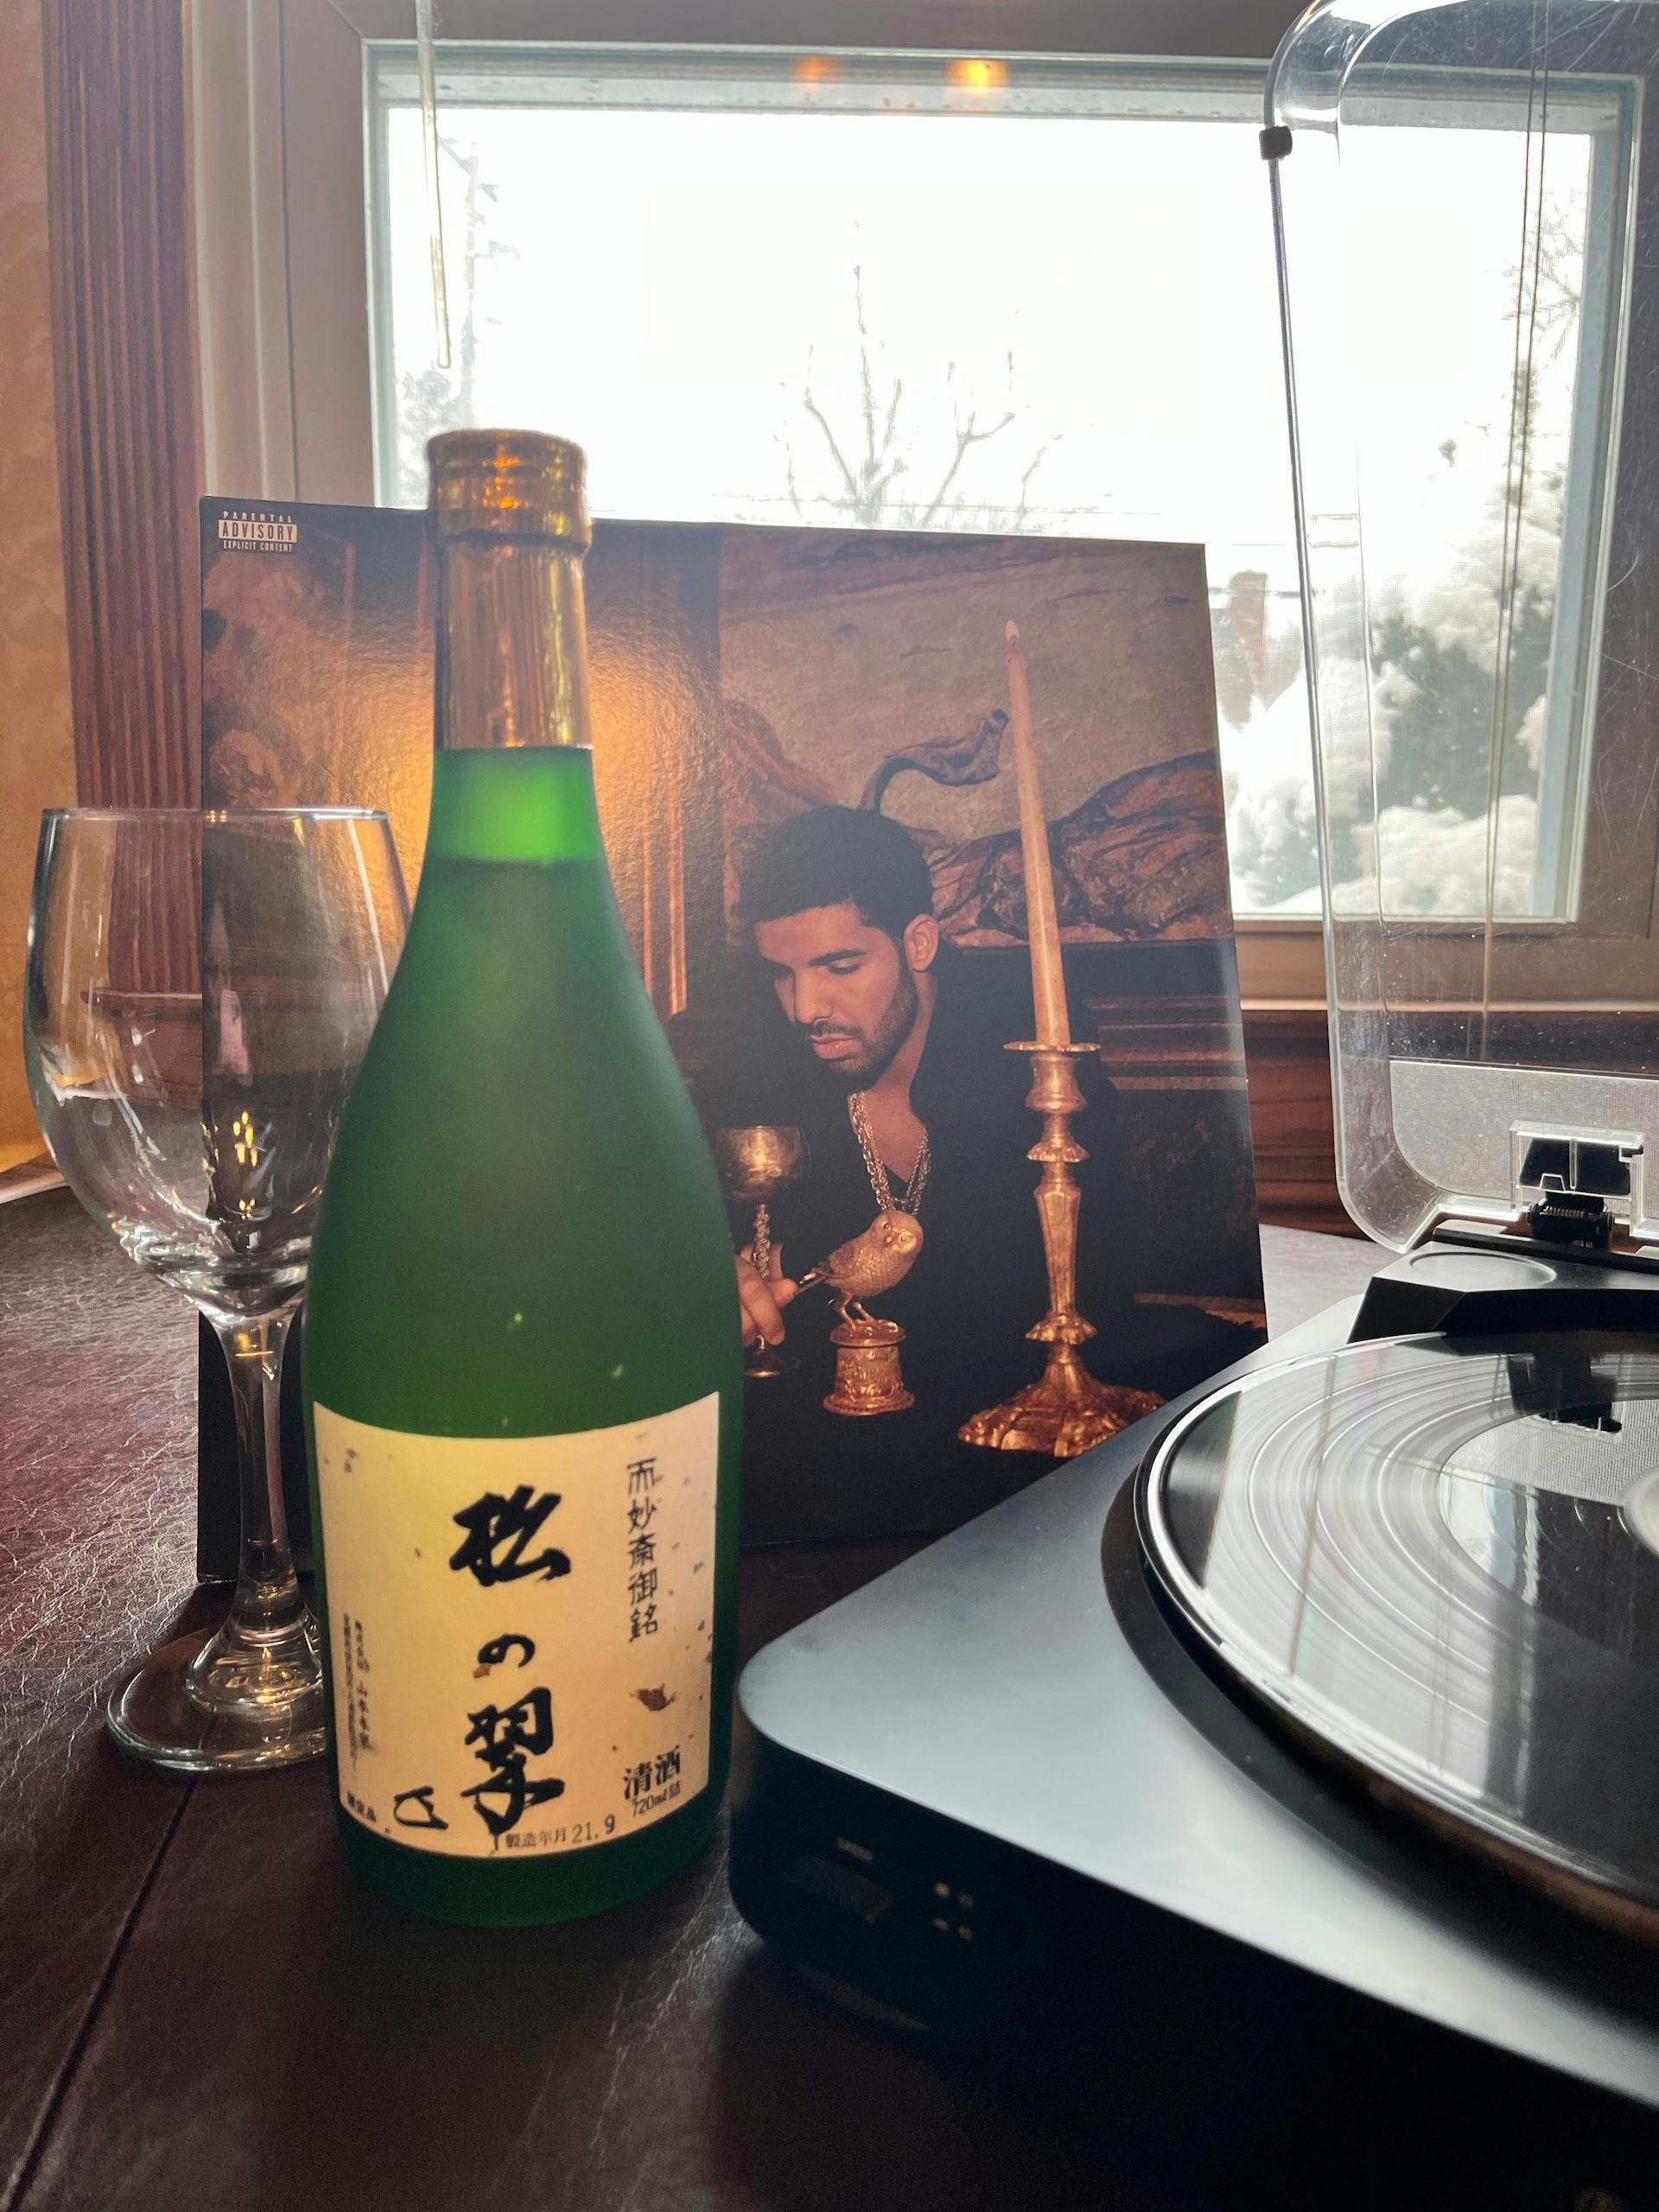 Matsu no Midori “Junmai Daiginjo” in front of “Take Care” vinyl record by Drake. Song playing: “Crew Love” feat. The Weeknd.